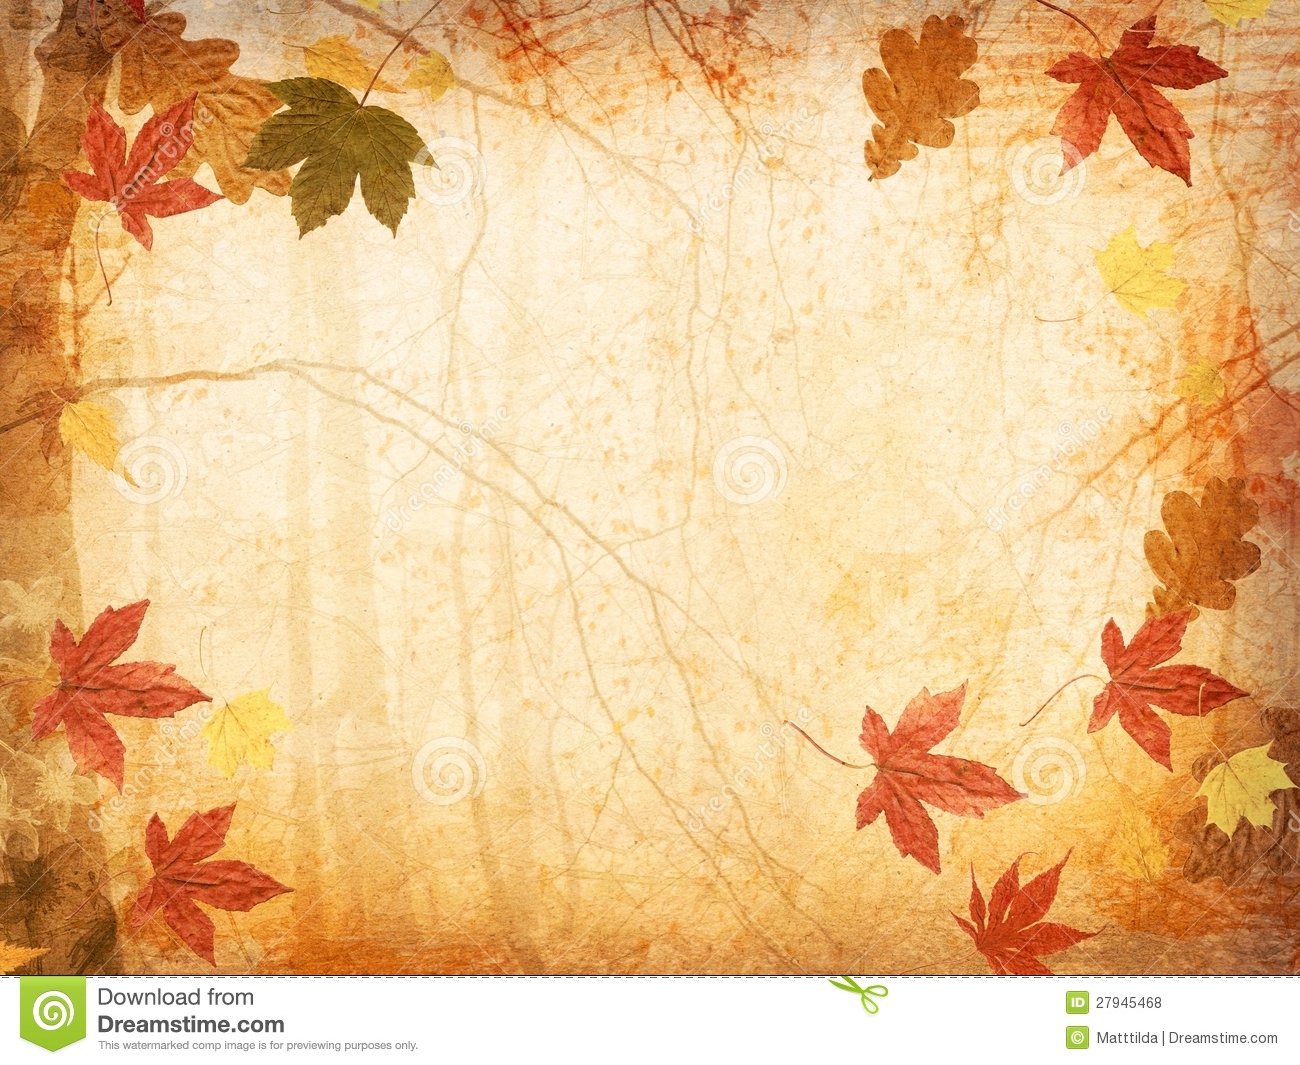 Fall Leaves Background Royalty Free Stock Photos   Image  27945468